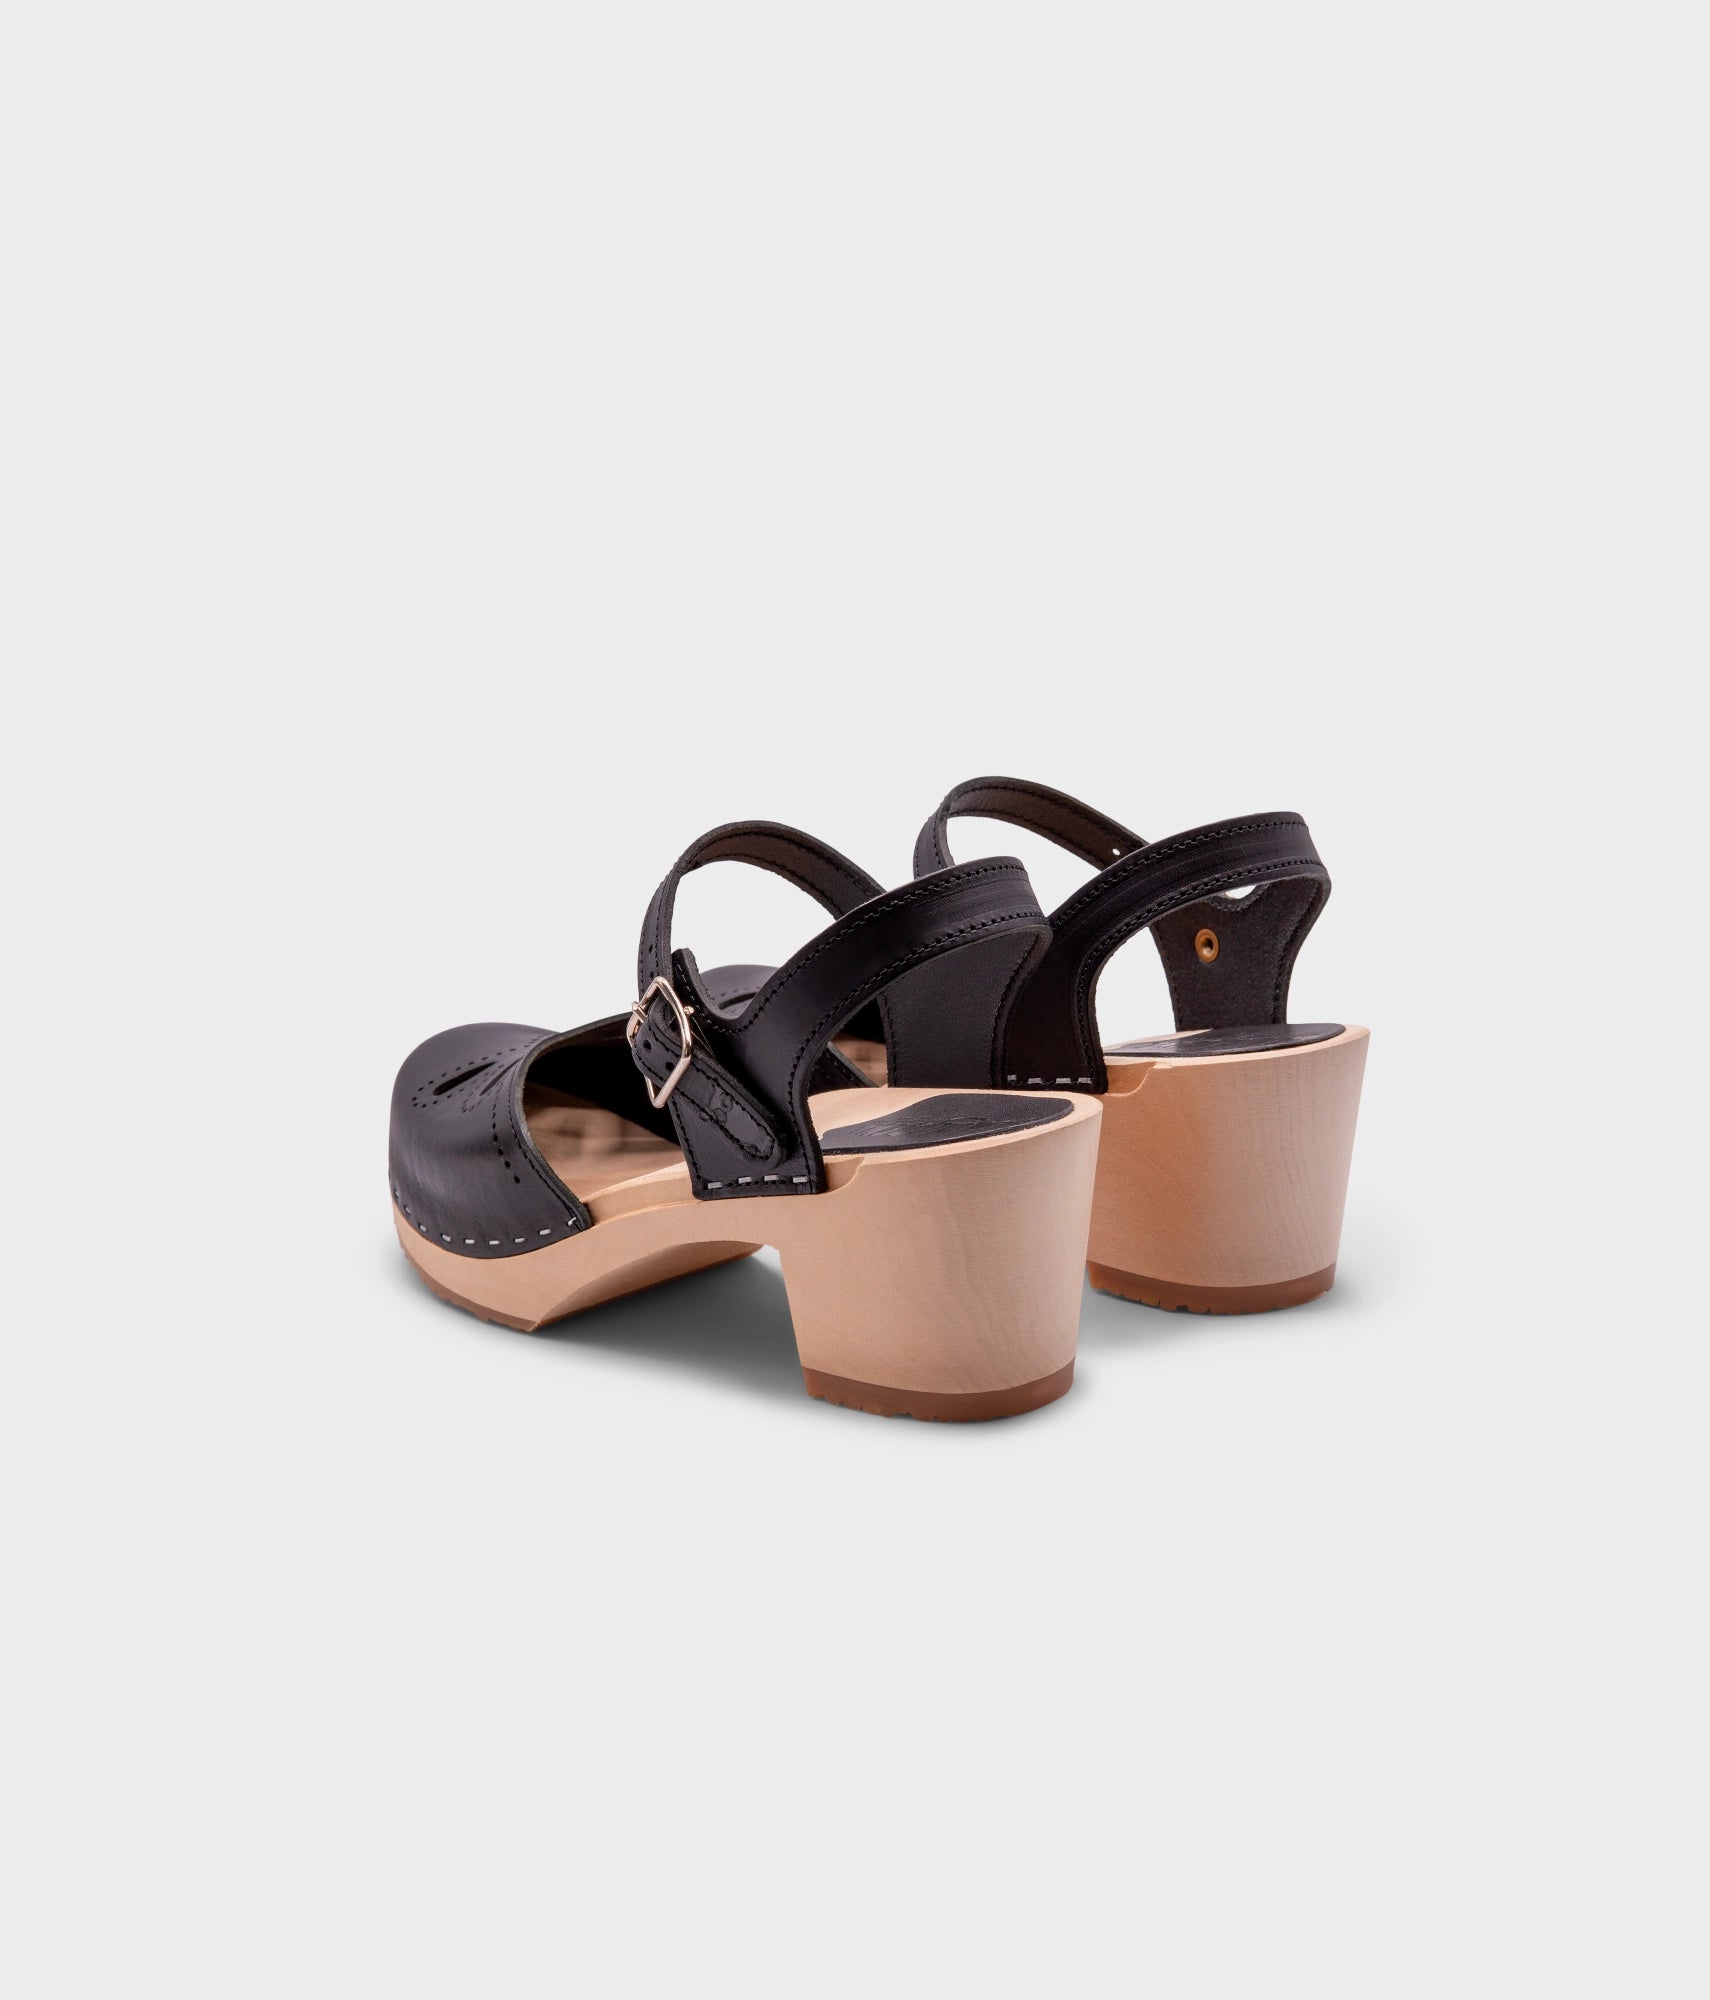 high-heeled clog sandal in black vegetable tanned leather with a blossom cut-out over the toe stapled on a light wooden base